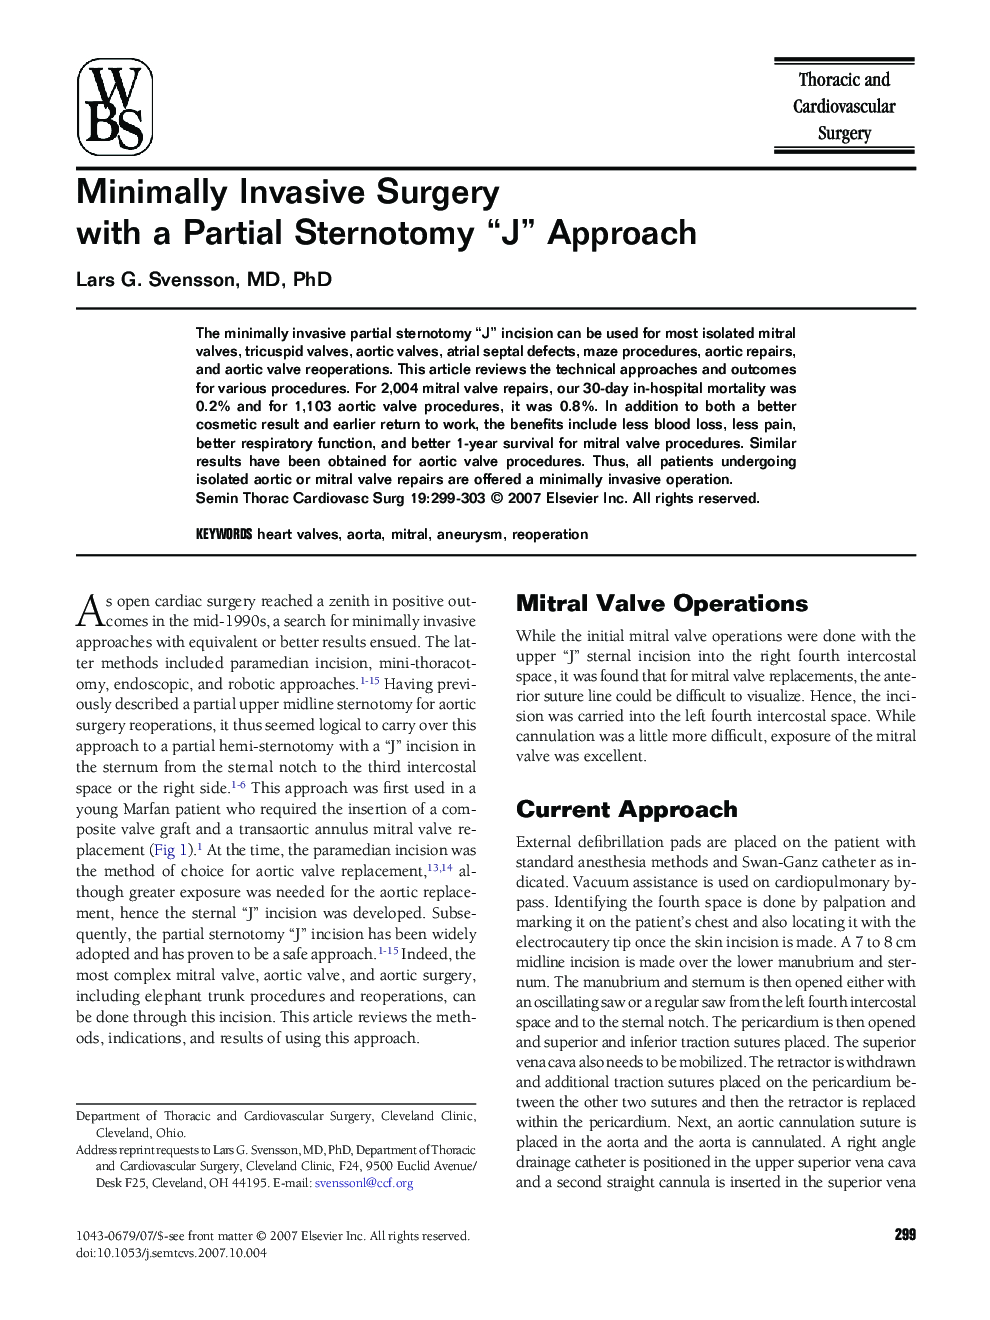 Minimally Invasive Surgery with a Partial Sternotomy “J” Approach